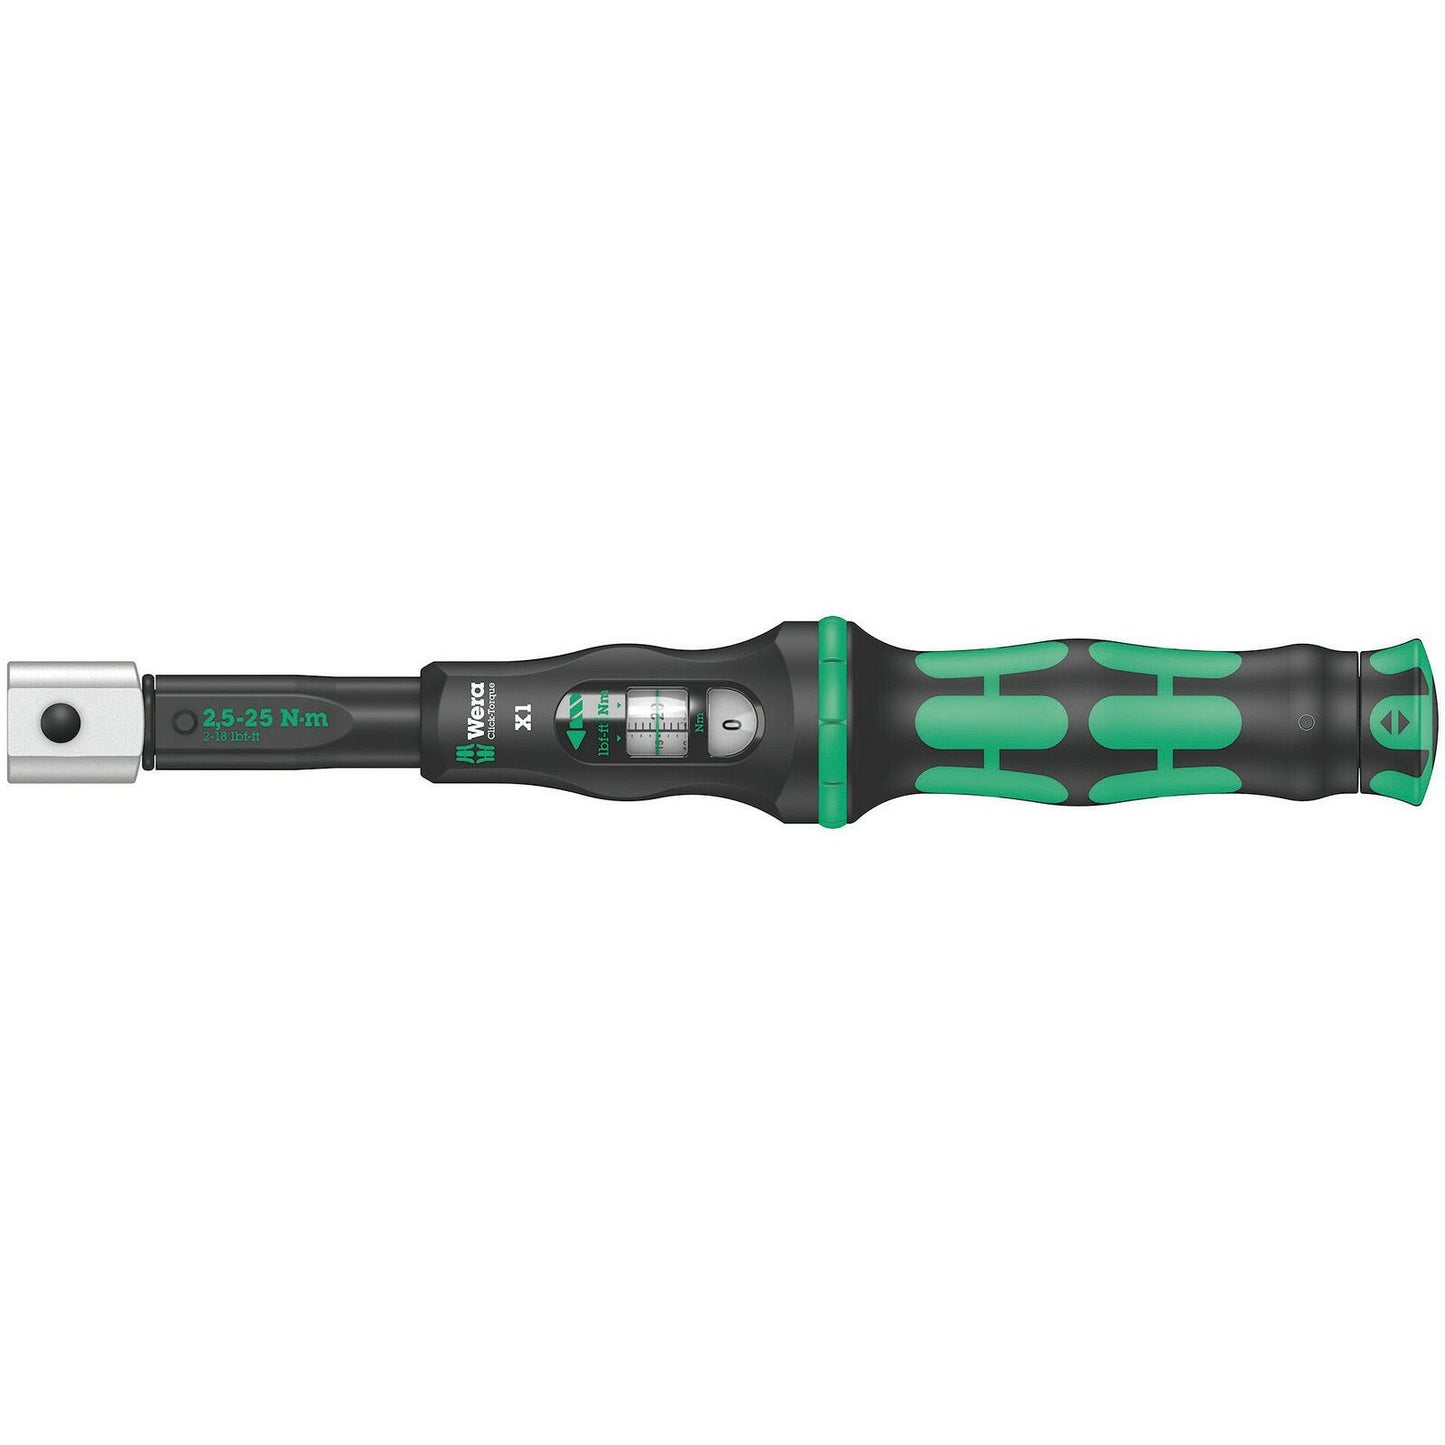 Wera Click Torque X 1 Torque Wrench/Spanner For Insert Tools 2.5 - 25Nm 9 X 12mm